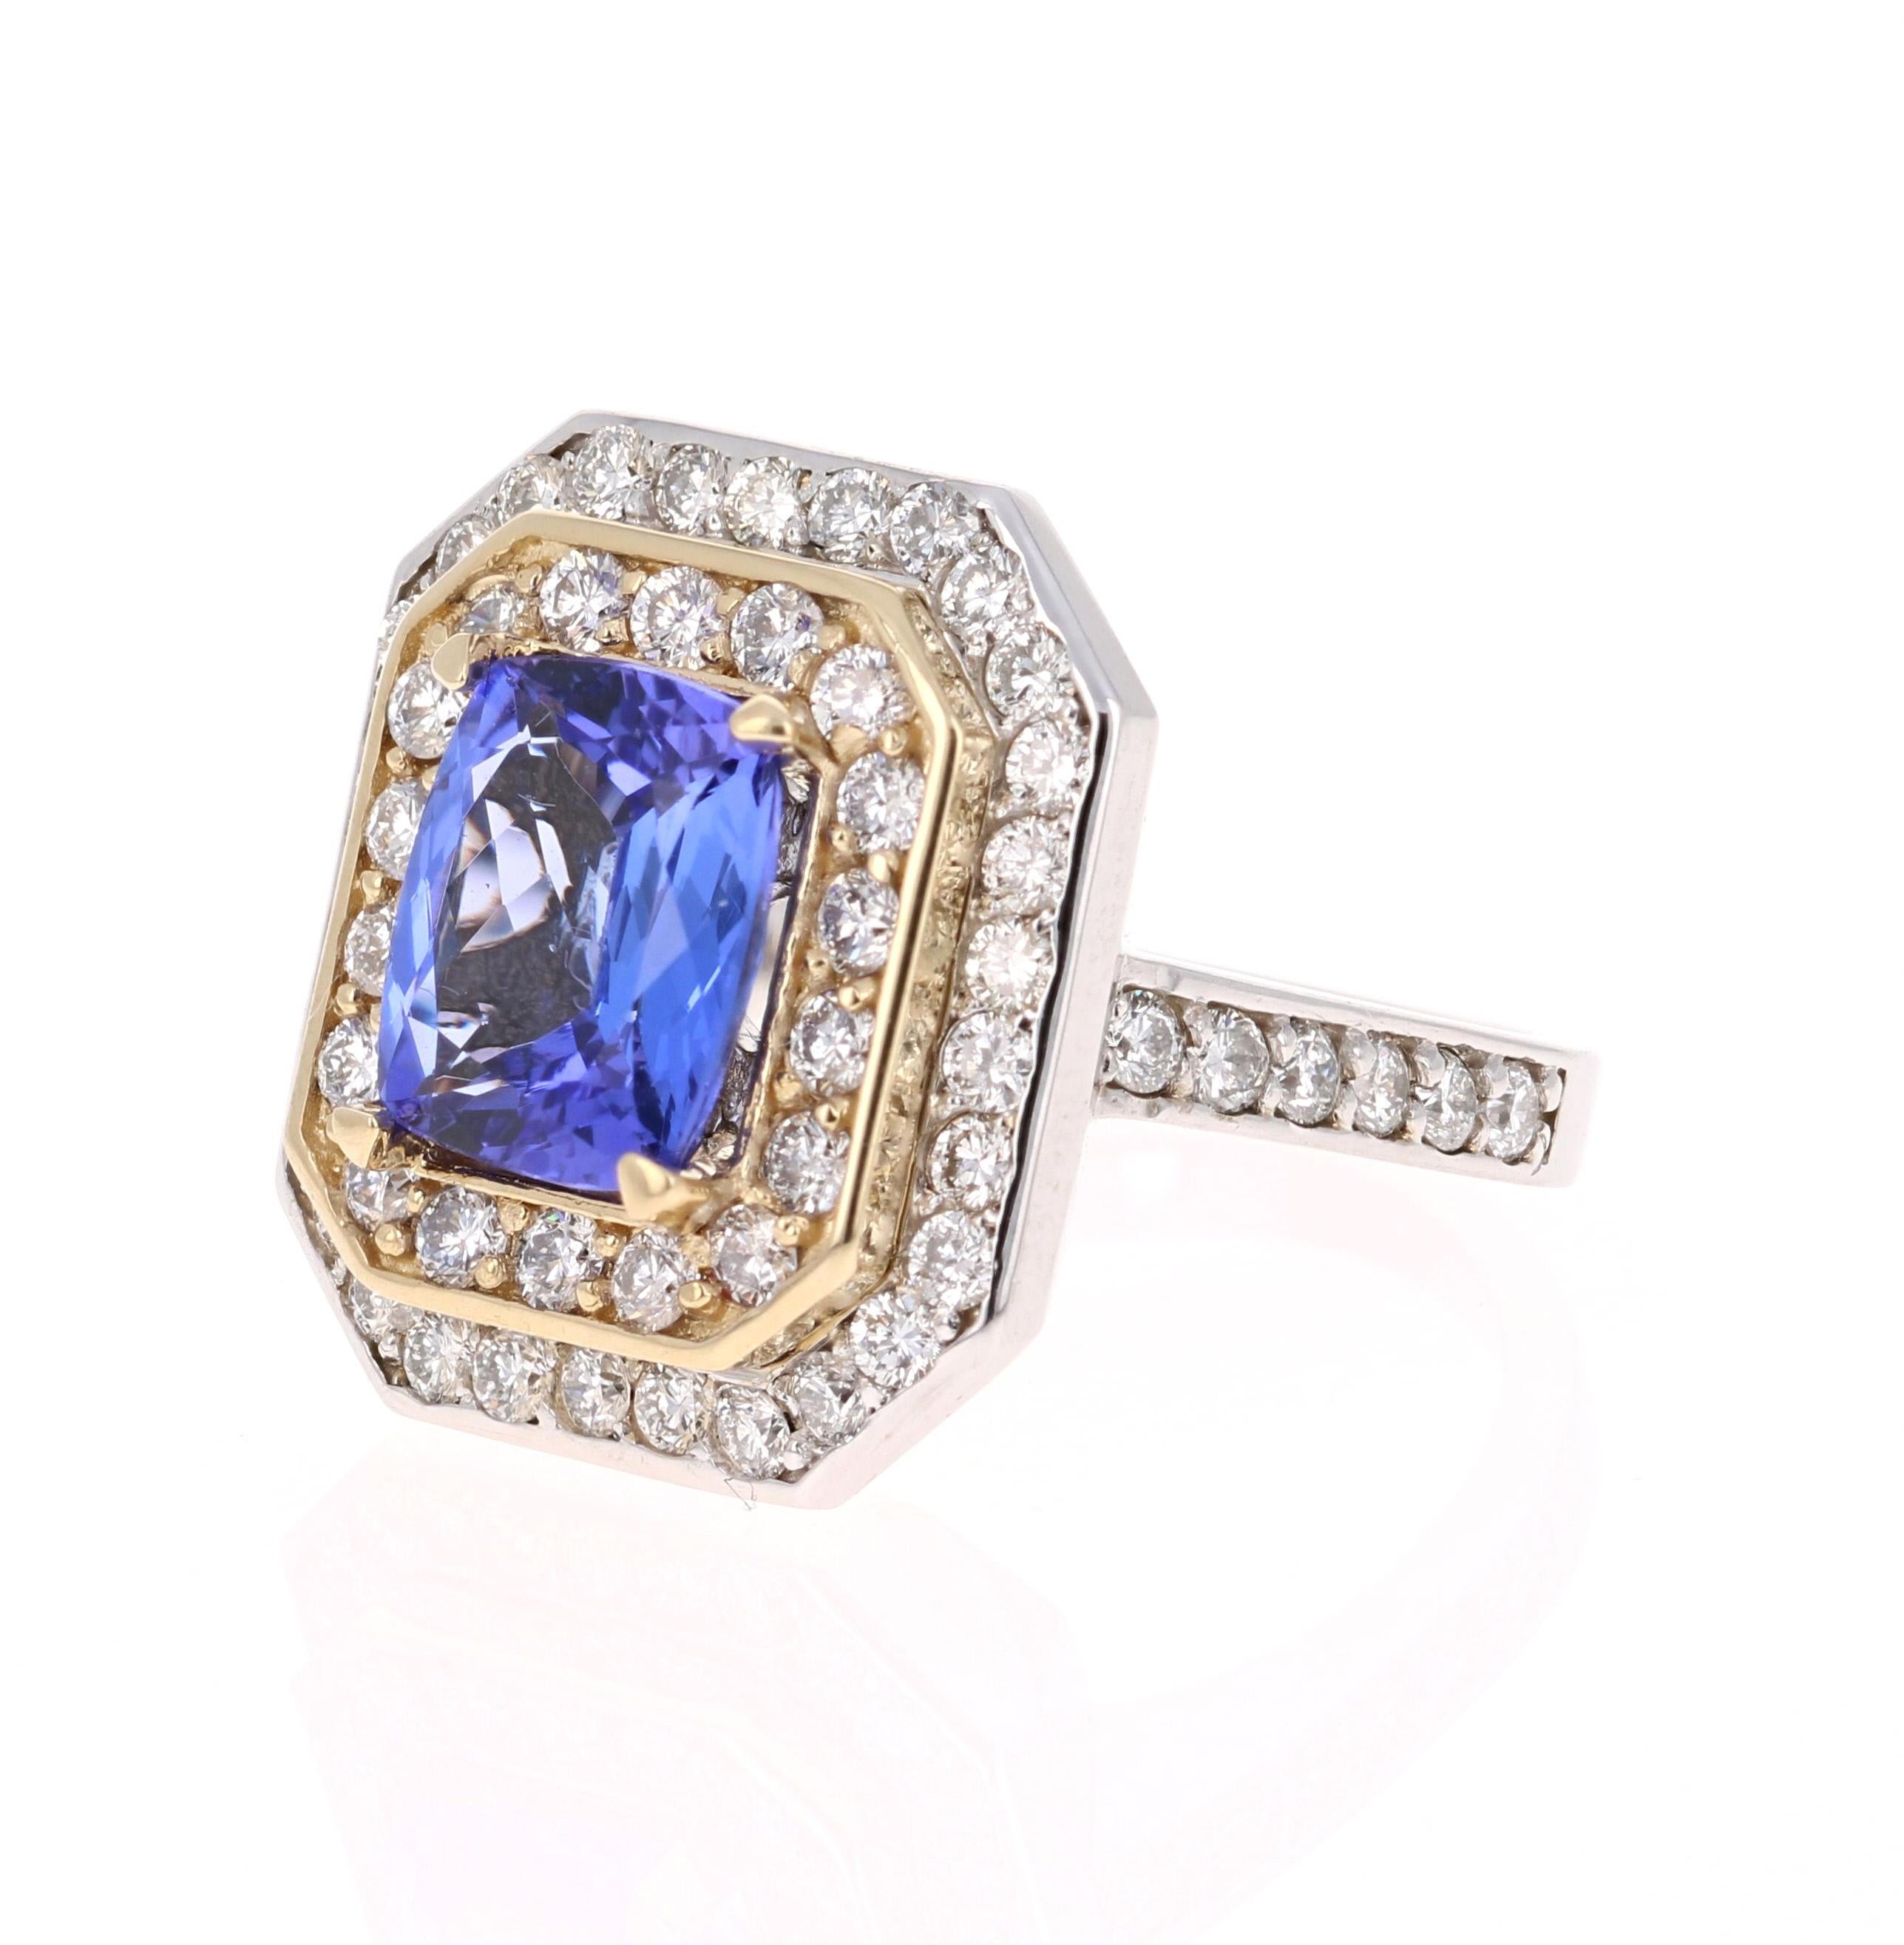 Contemporary 4.46 Carat Tanzanite Diamond 14 Karat White and Yellow Gold Cocktail Ring For Sale